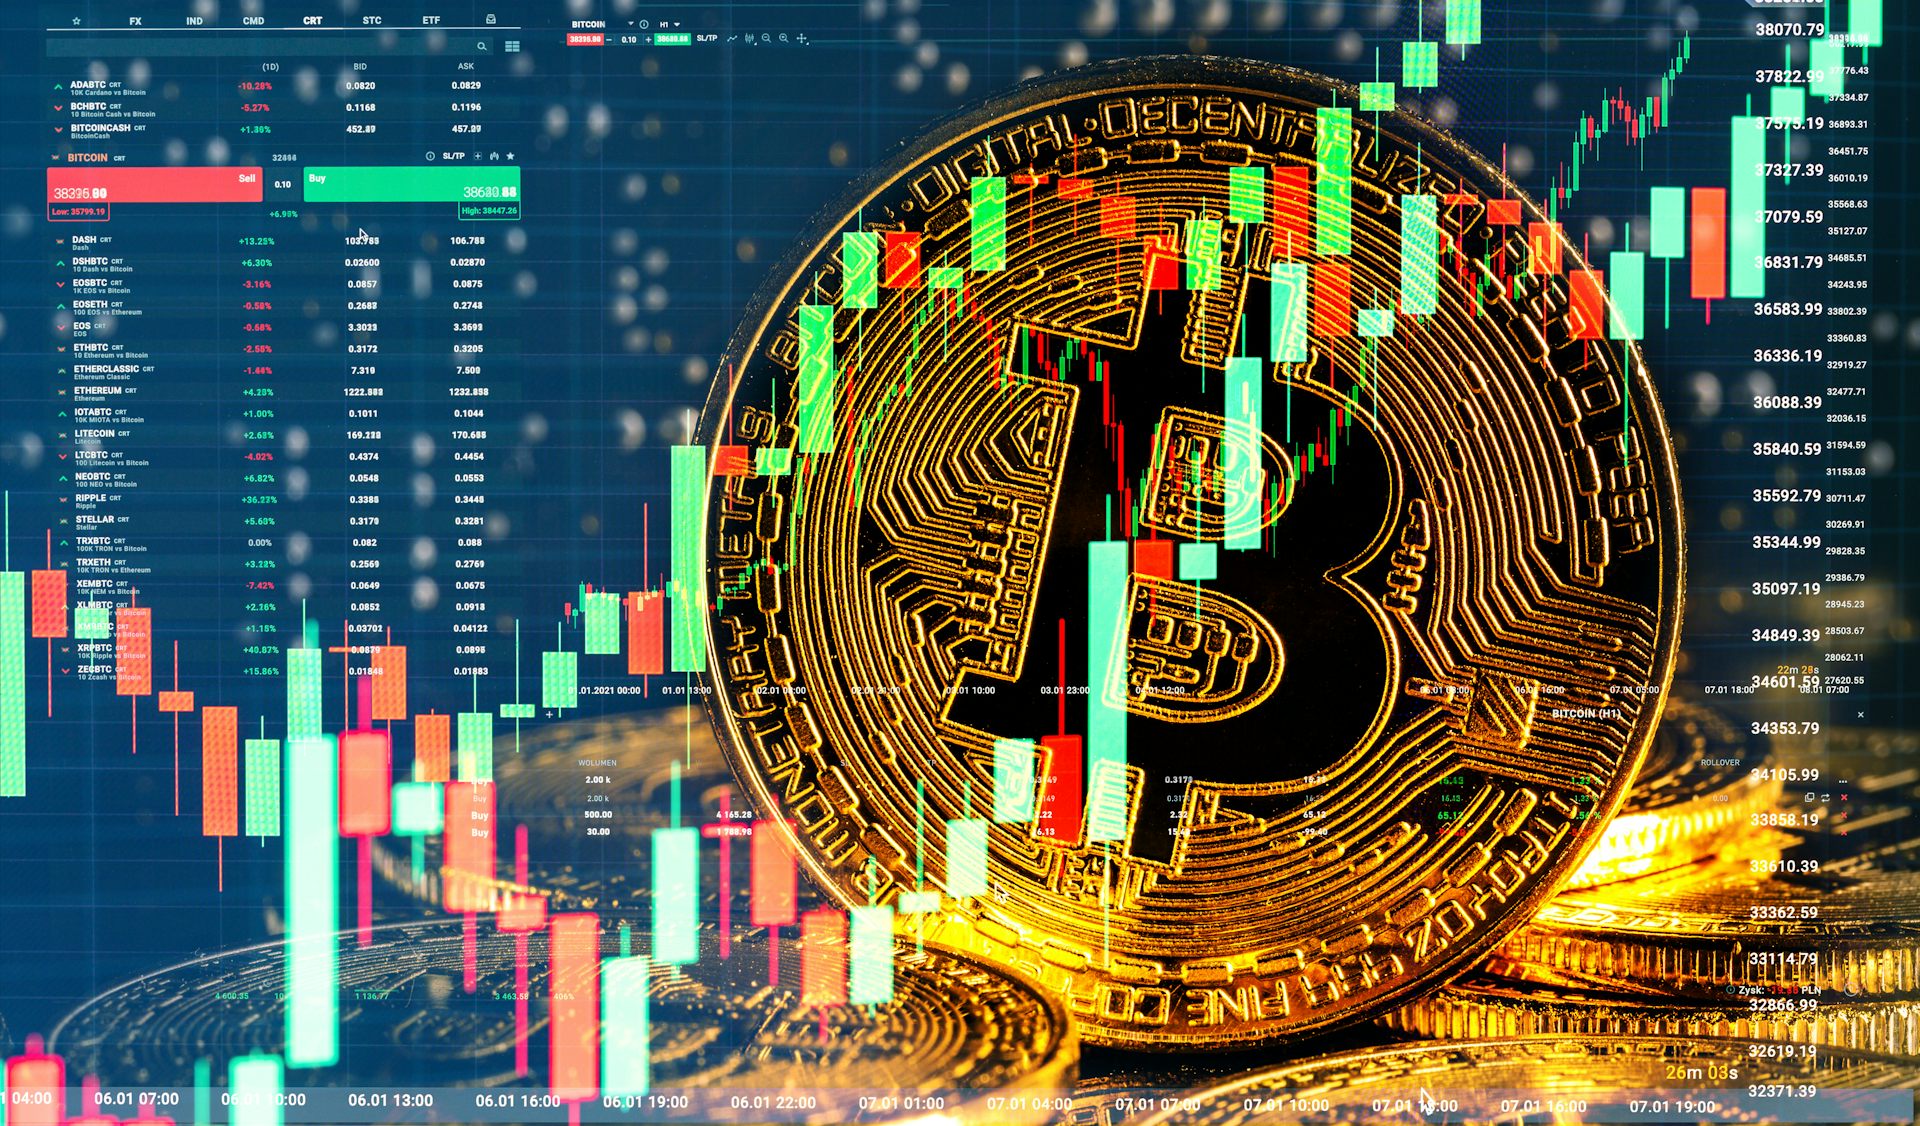 Bitcoin: why its value has rocketed once again